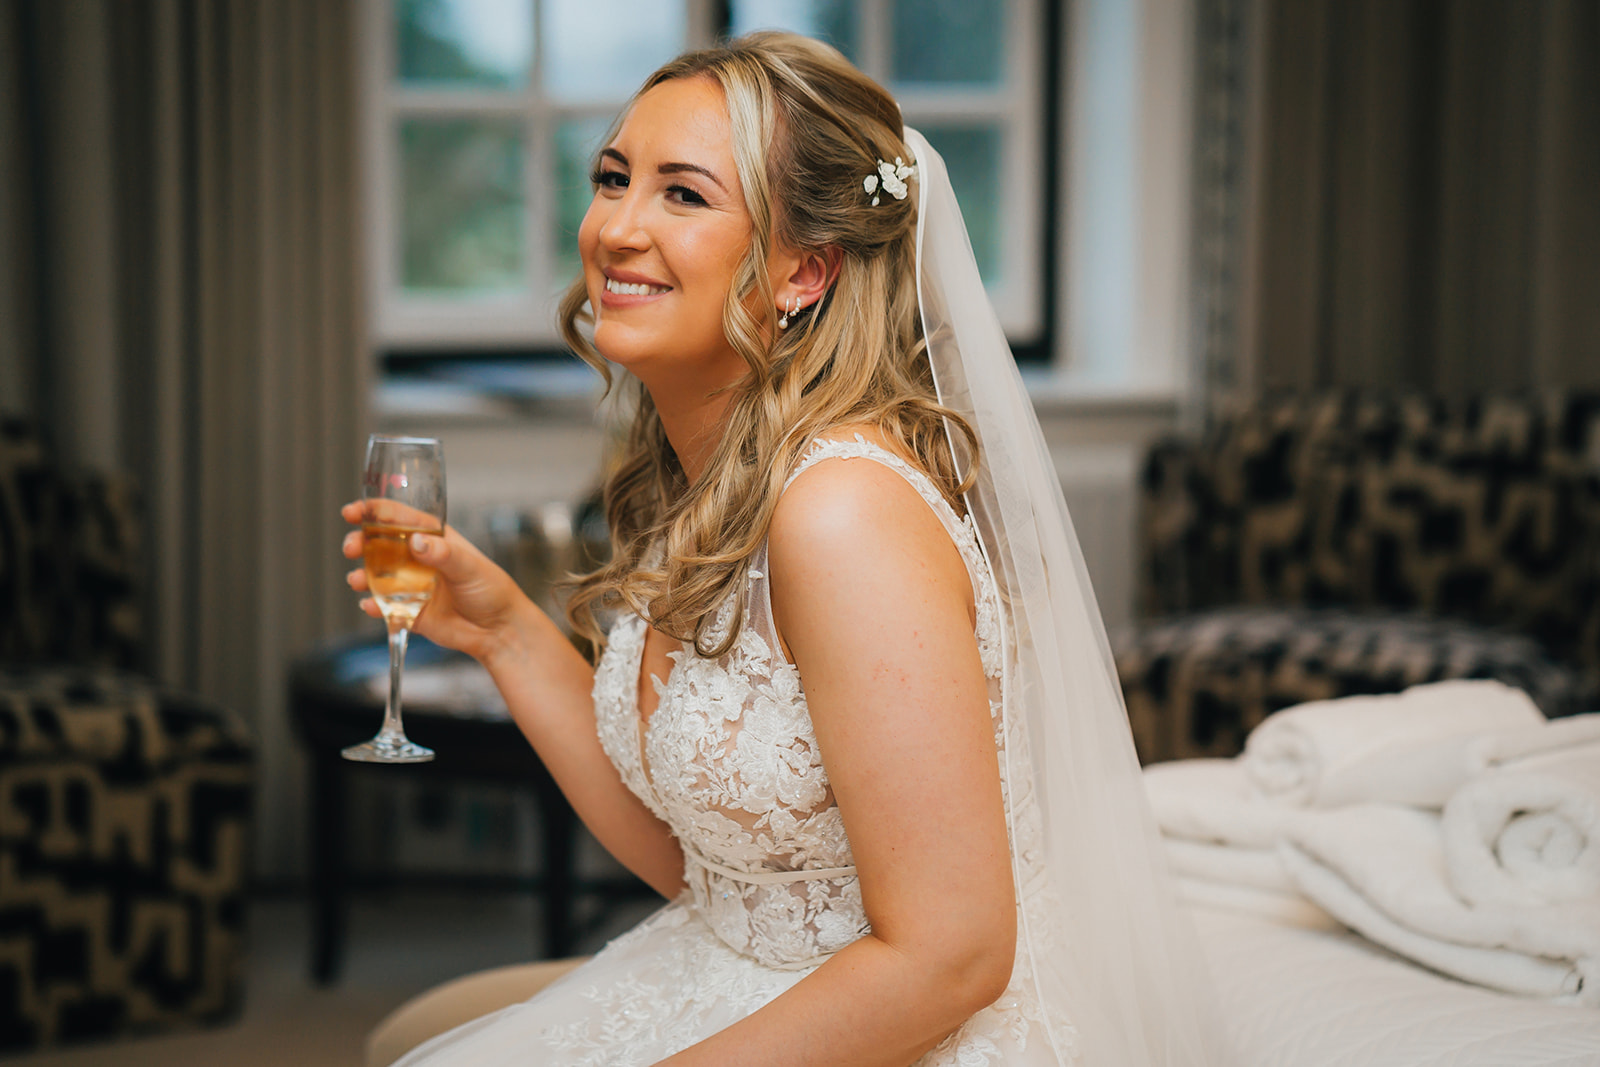 the bride laughs as she drinks champagne in the bridal suite